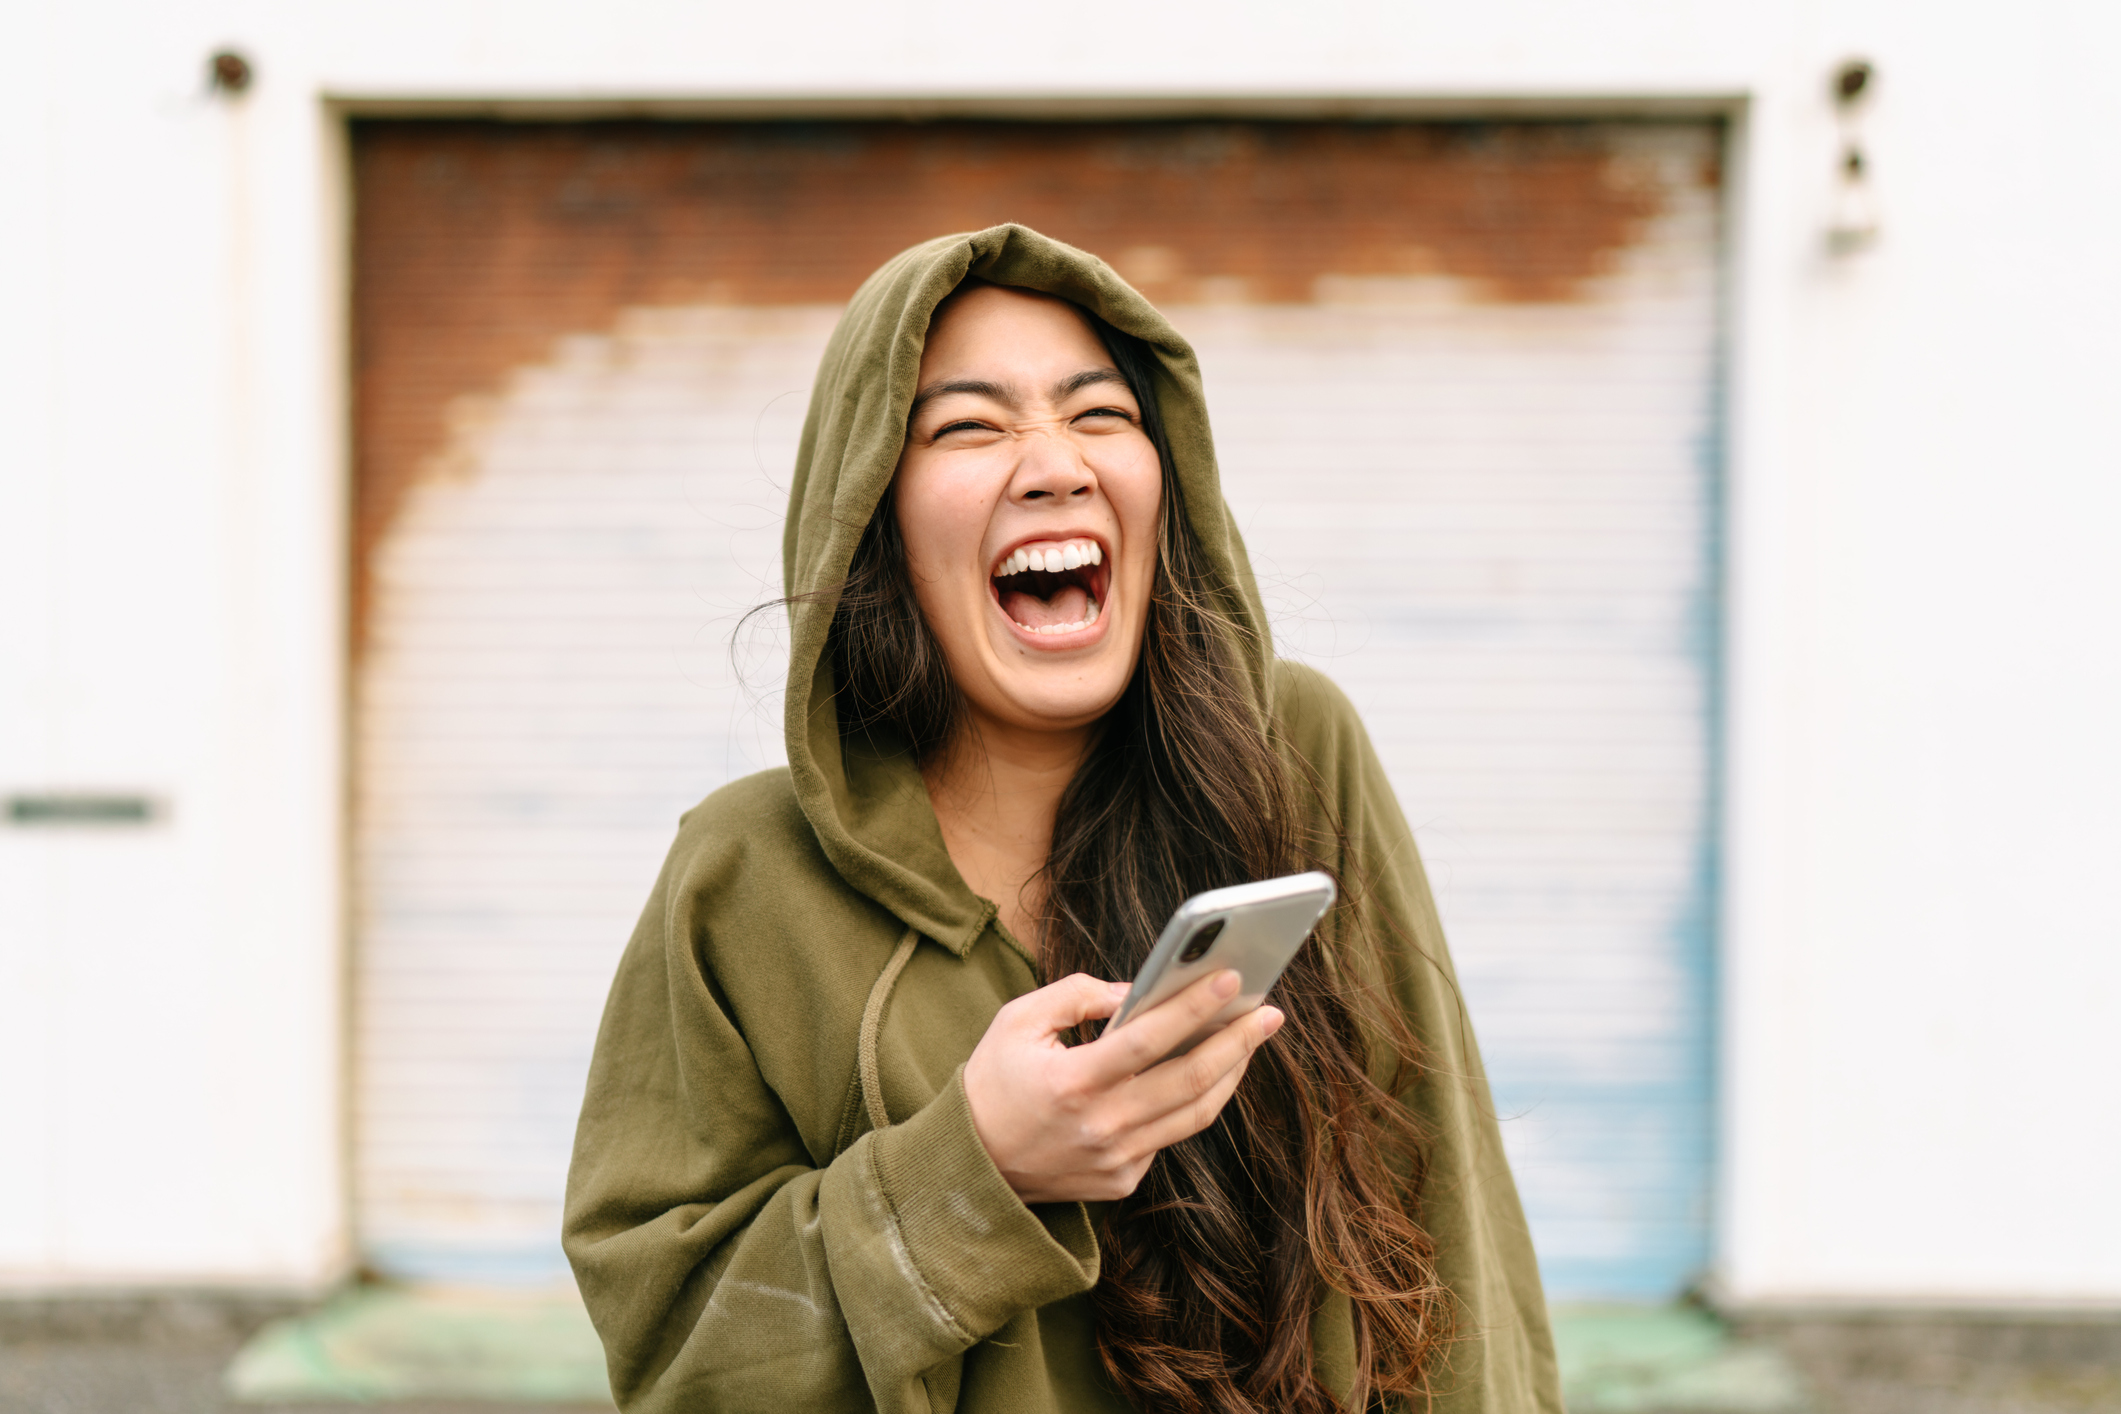 Can an App Really Work Out If You’re Truly Happy?